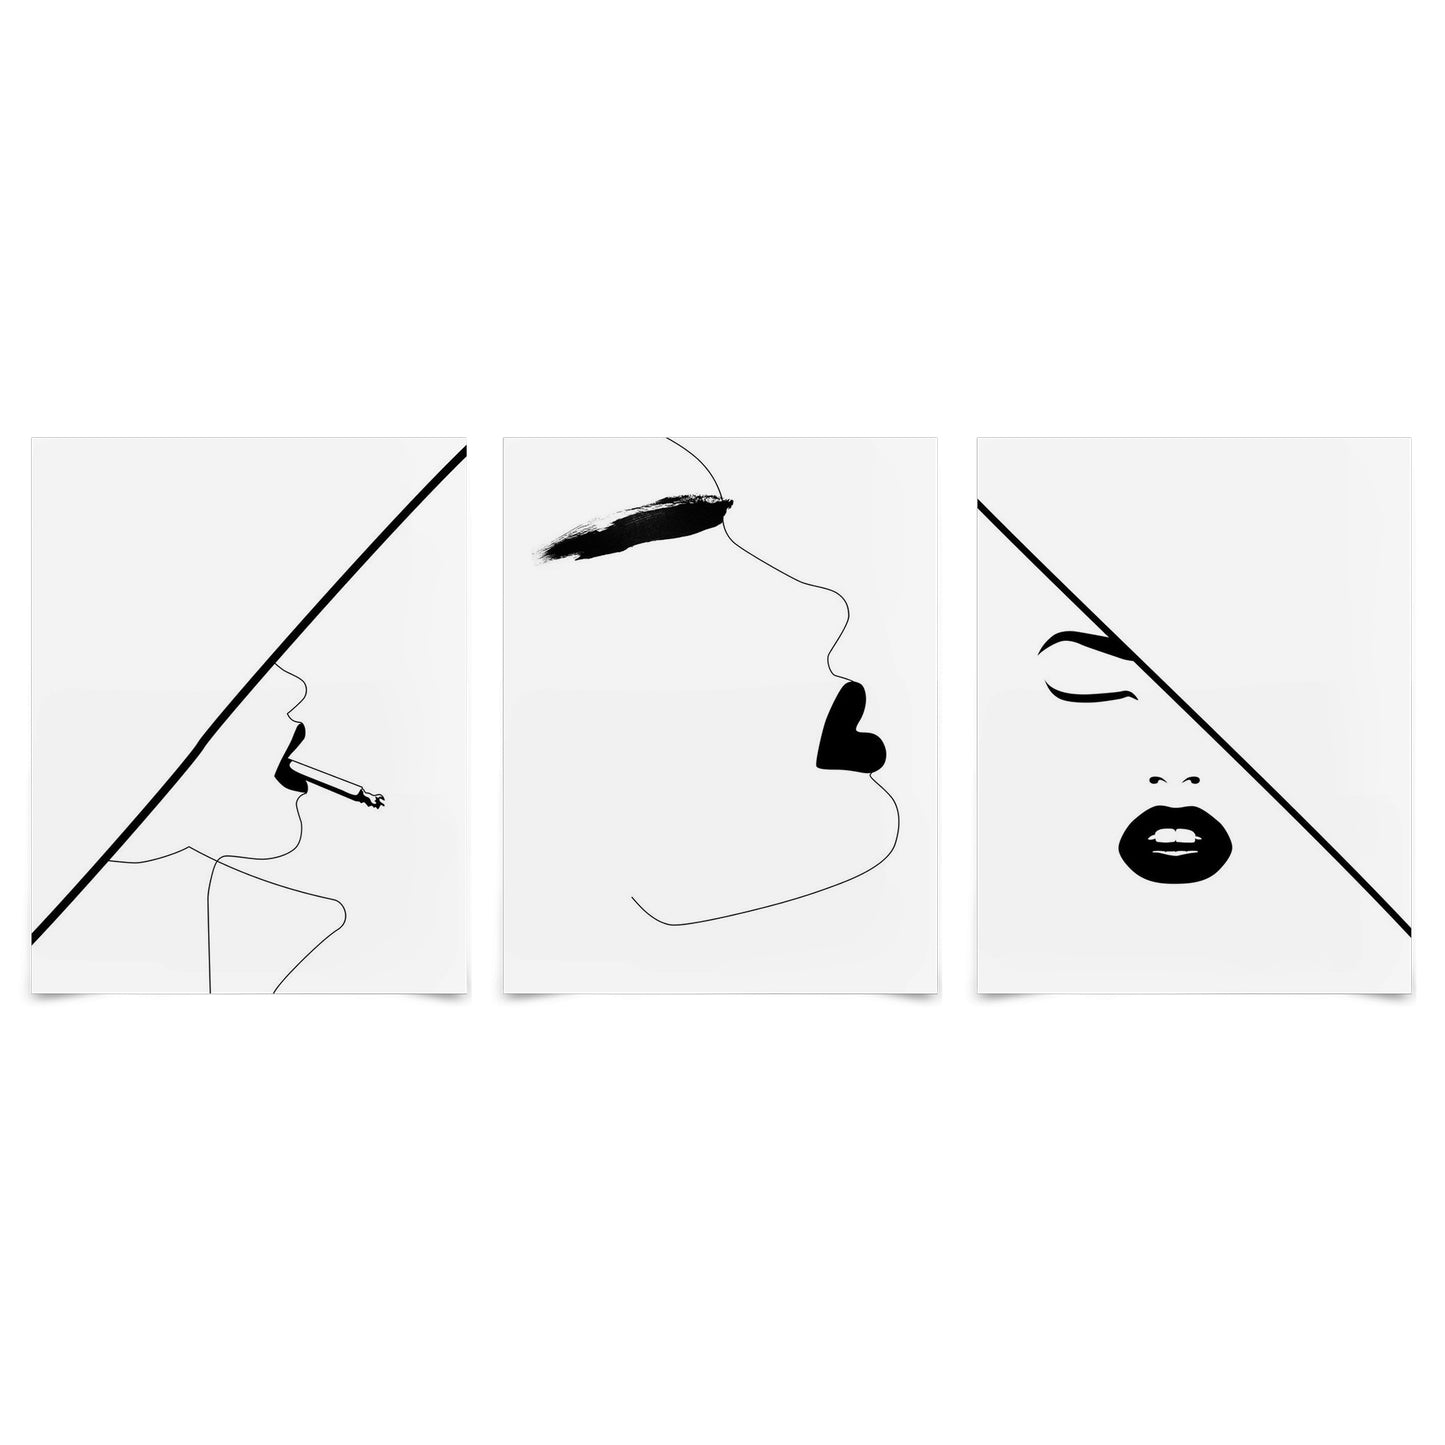 (Set of 3) Triptych Wall Art Bold Faces by Explicit Design - Poster Print